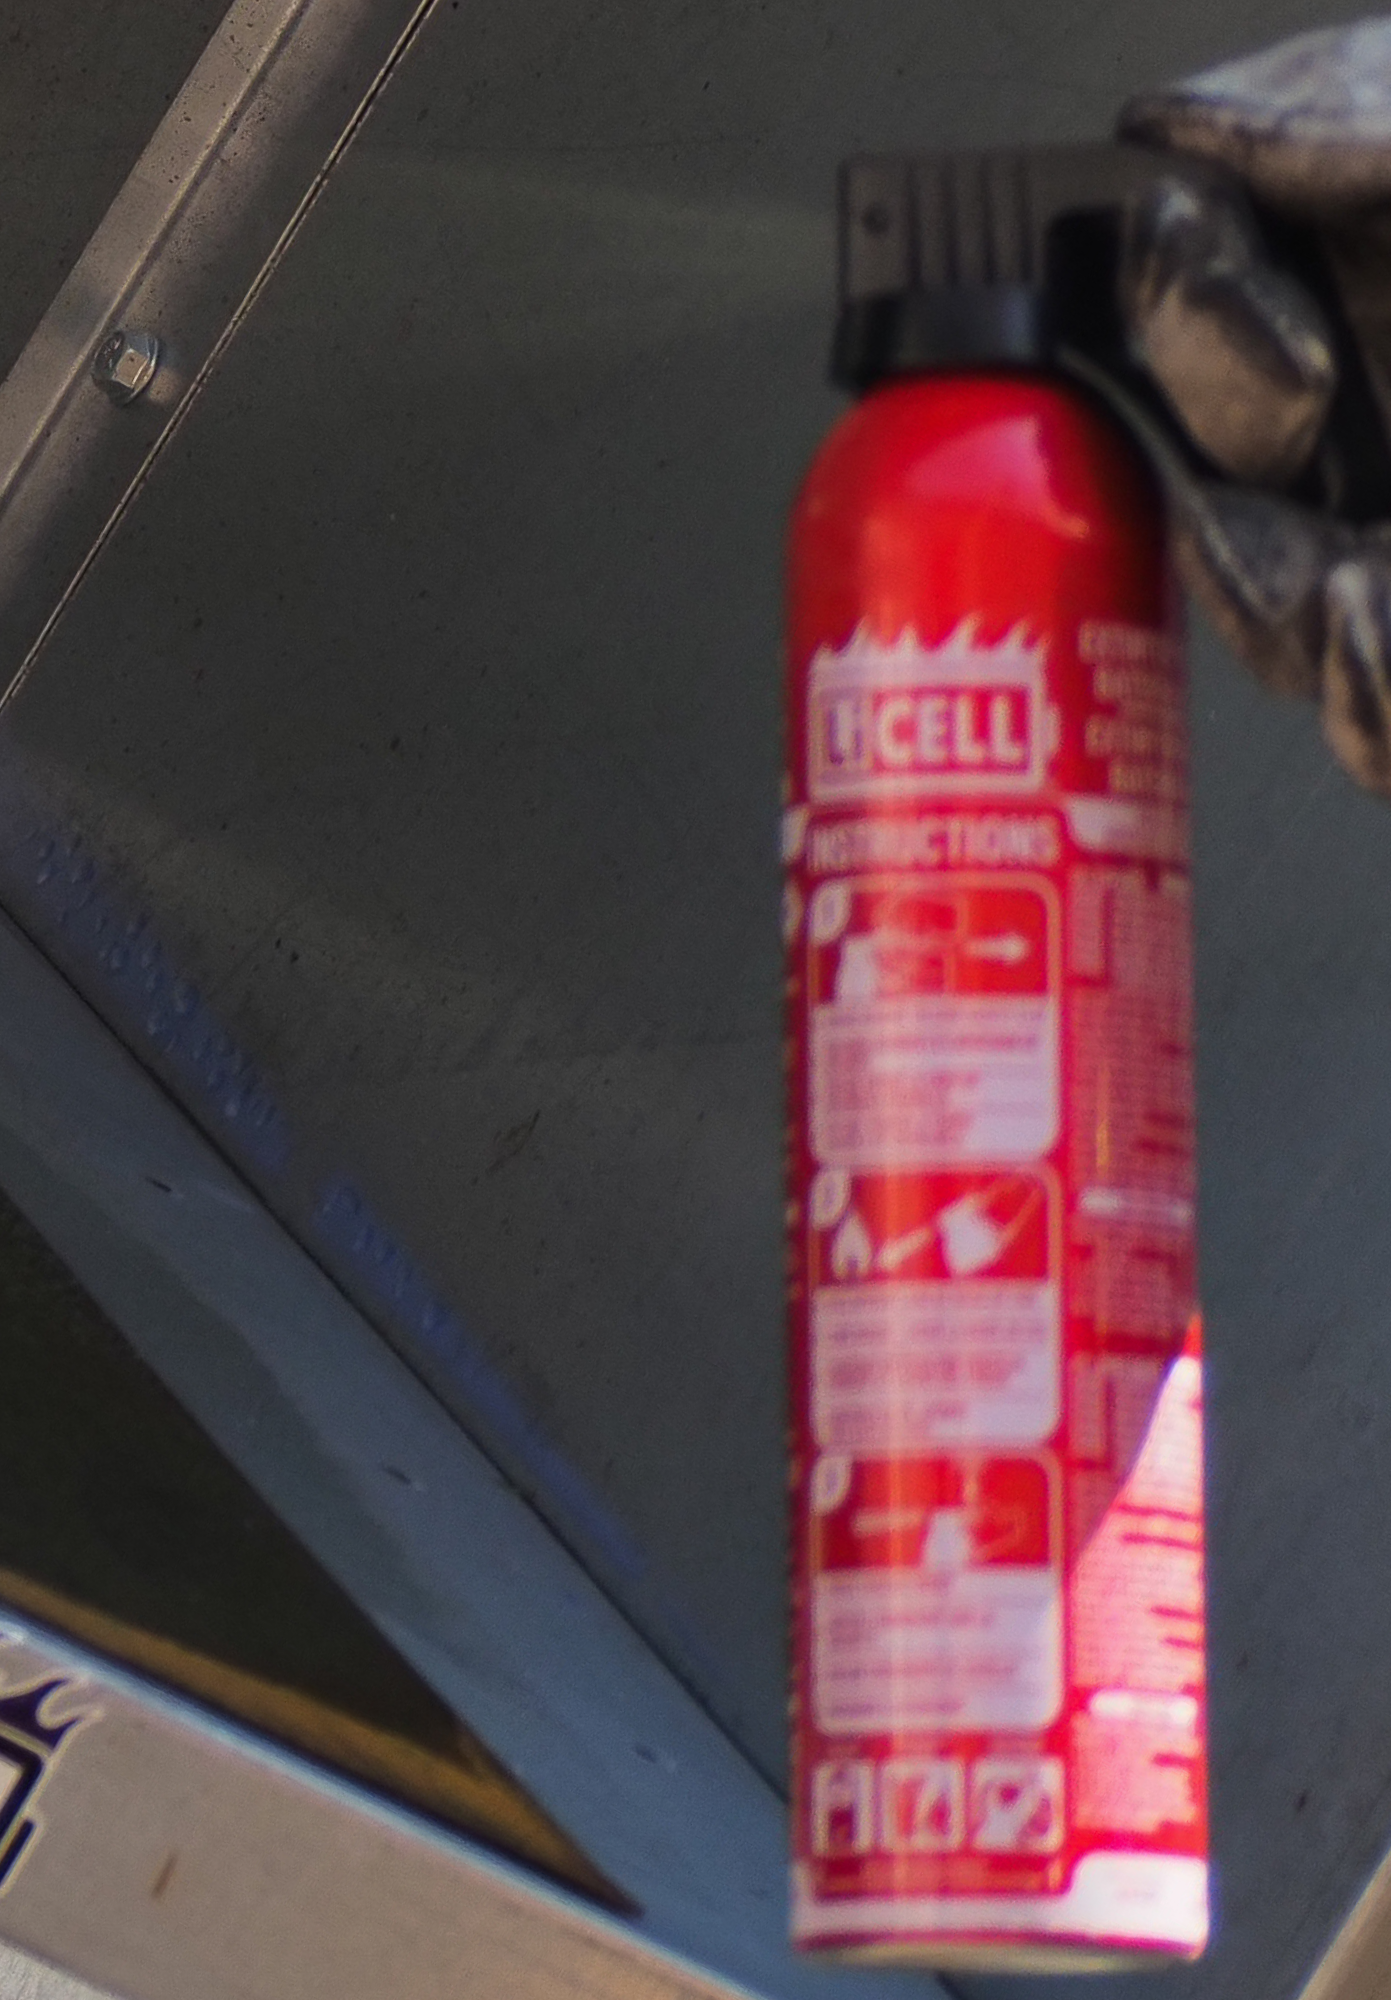 LiCELL -  AA500 500ml AVD - Lithium Battery Fire Extinguisher - Sea-Fire | licell-aa500-500ml-avd-lithium-battery-fire-extinguisher-sea-fire | Licel | Licell Lithium Battery Fire Extinguisher